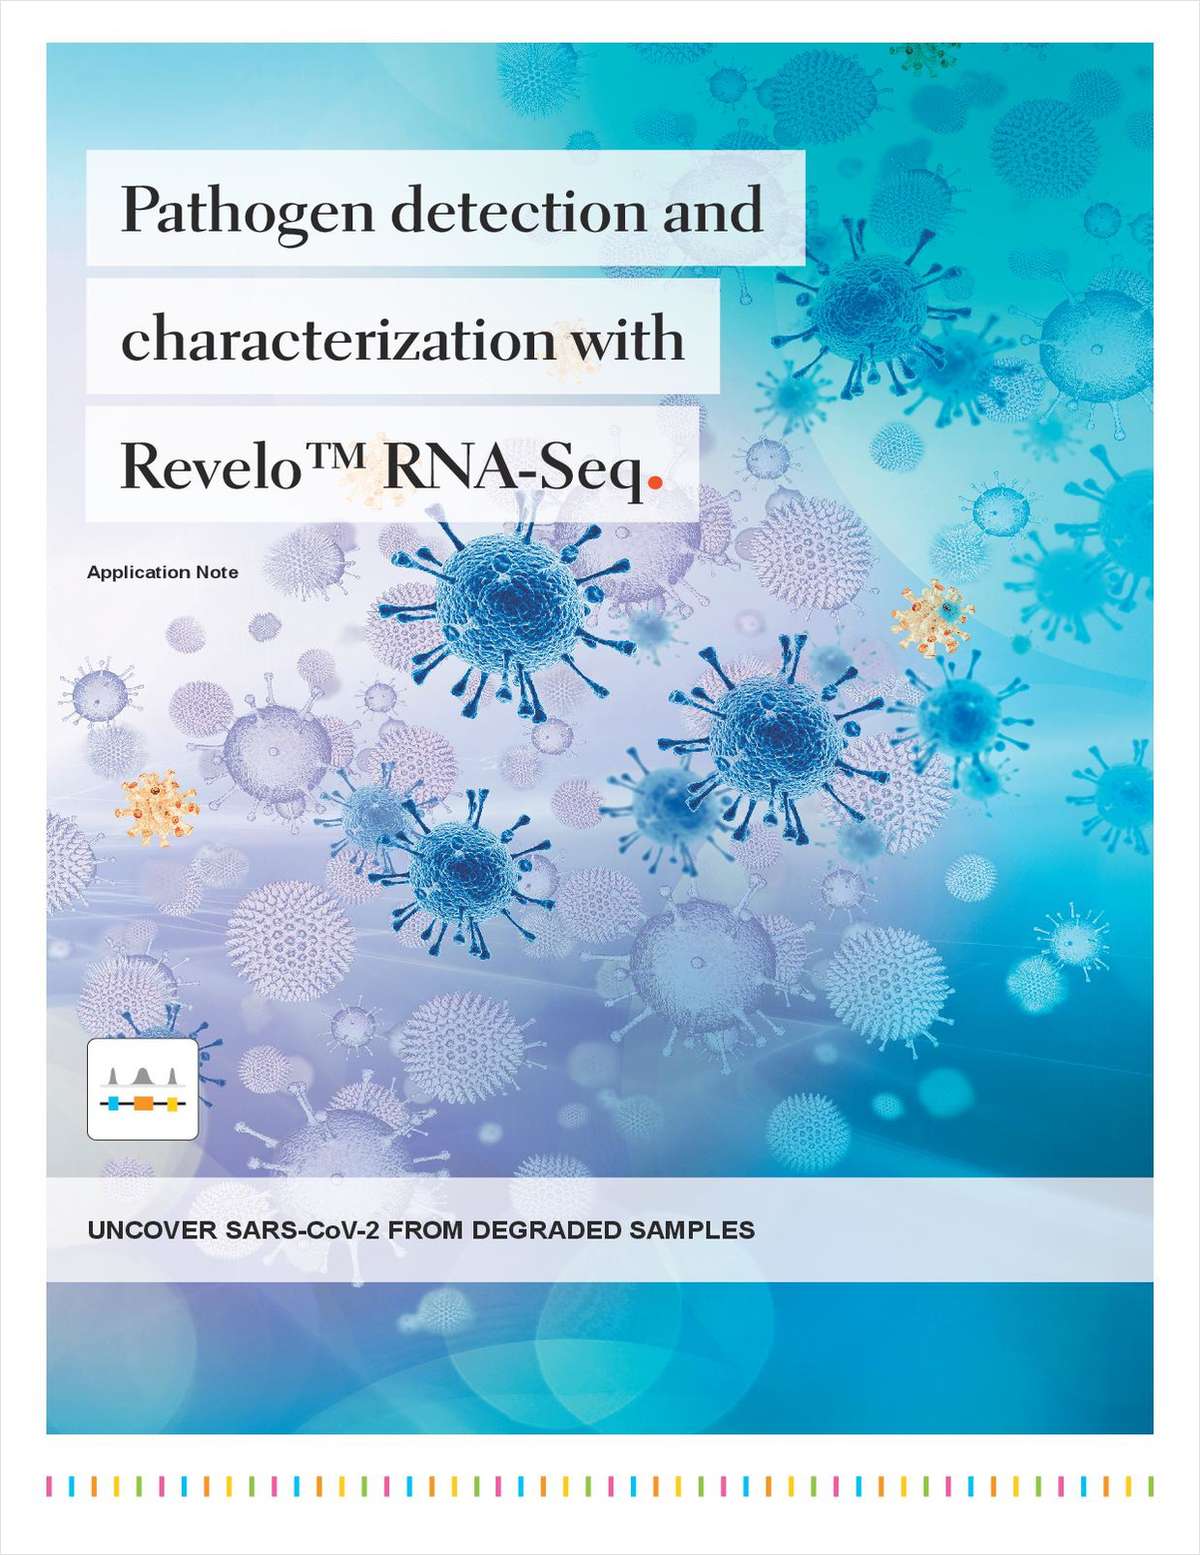 SARS-CoV-2 Detection and Characterization With Revelo RNA-Seq